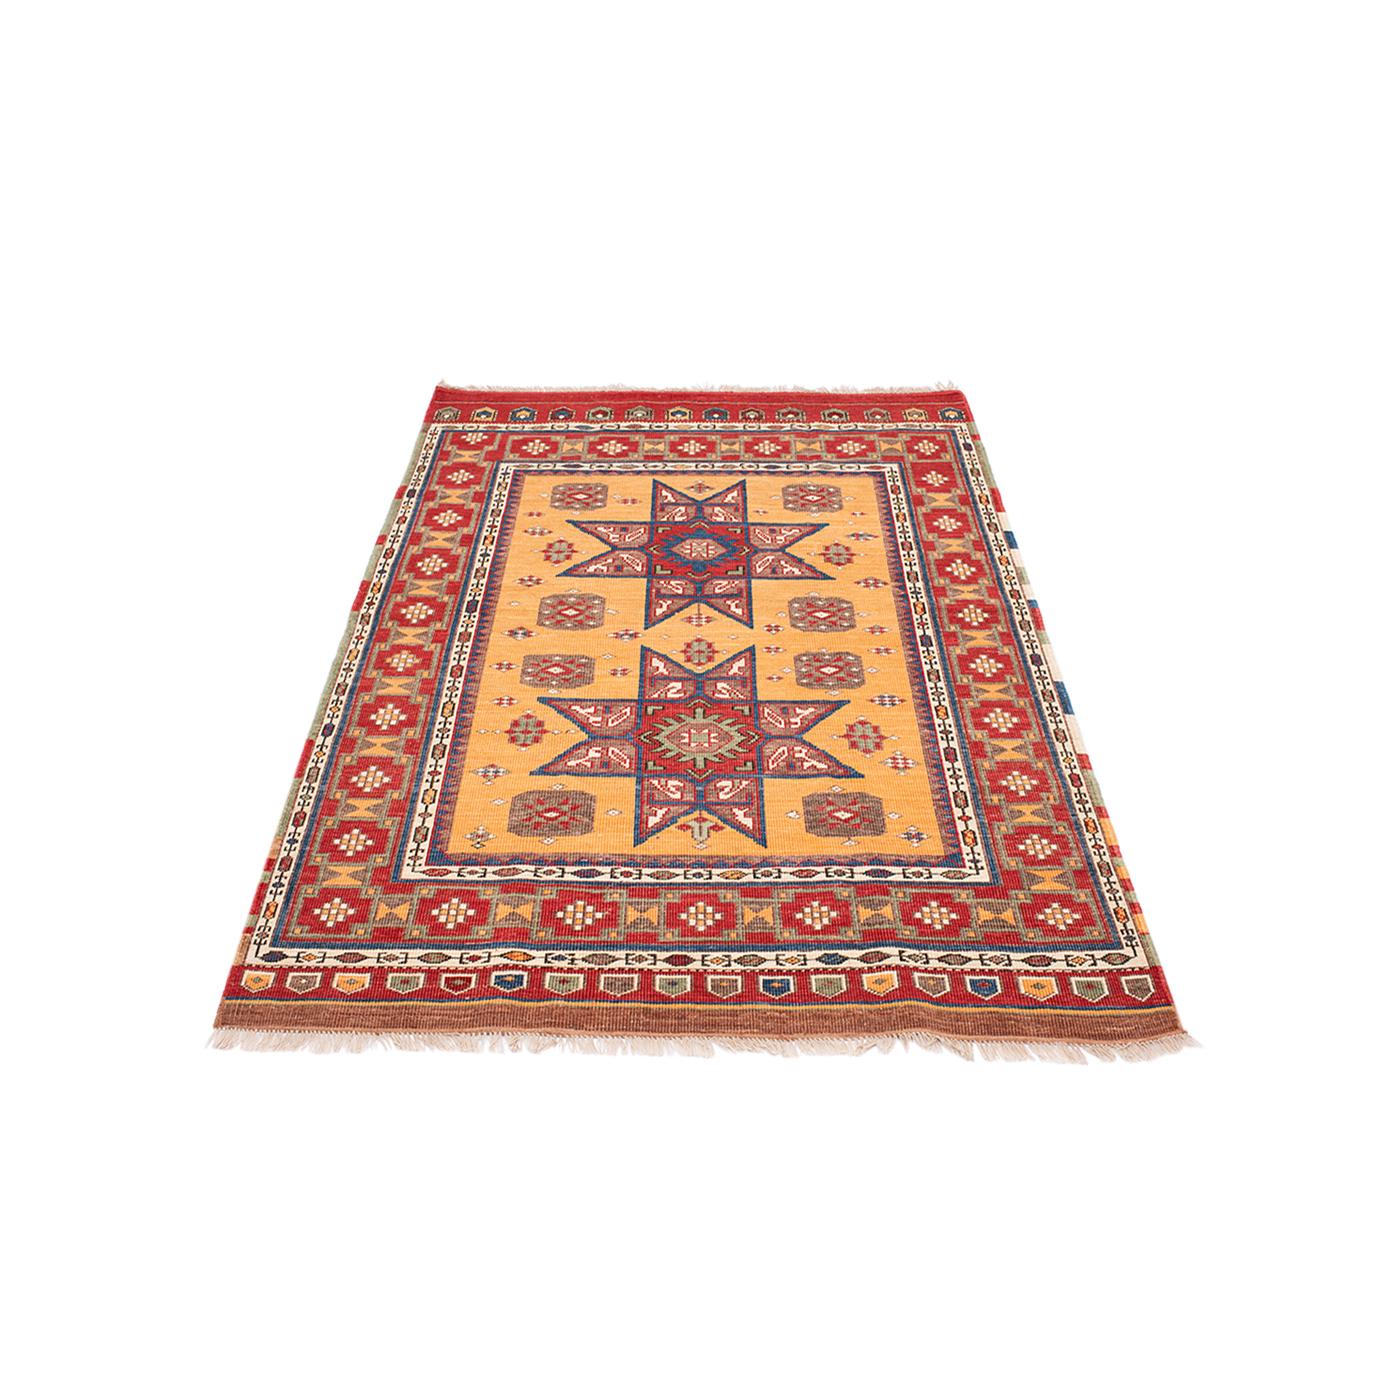 COLOUR: Original
MATERIAL: 100% Wool
QUALITY: 23 x 39 Persian knot / inch
ORIGIN: Persian knotted rug produced in Afghanistan 
 
RUG SIZE DISPLAYED: 128cm x 191cm
 
Inspired by an original rug seen on a trip to Istanbul, Star Kazak is a modernised